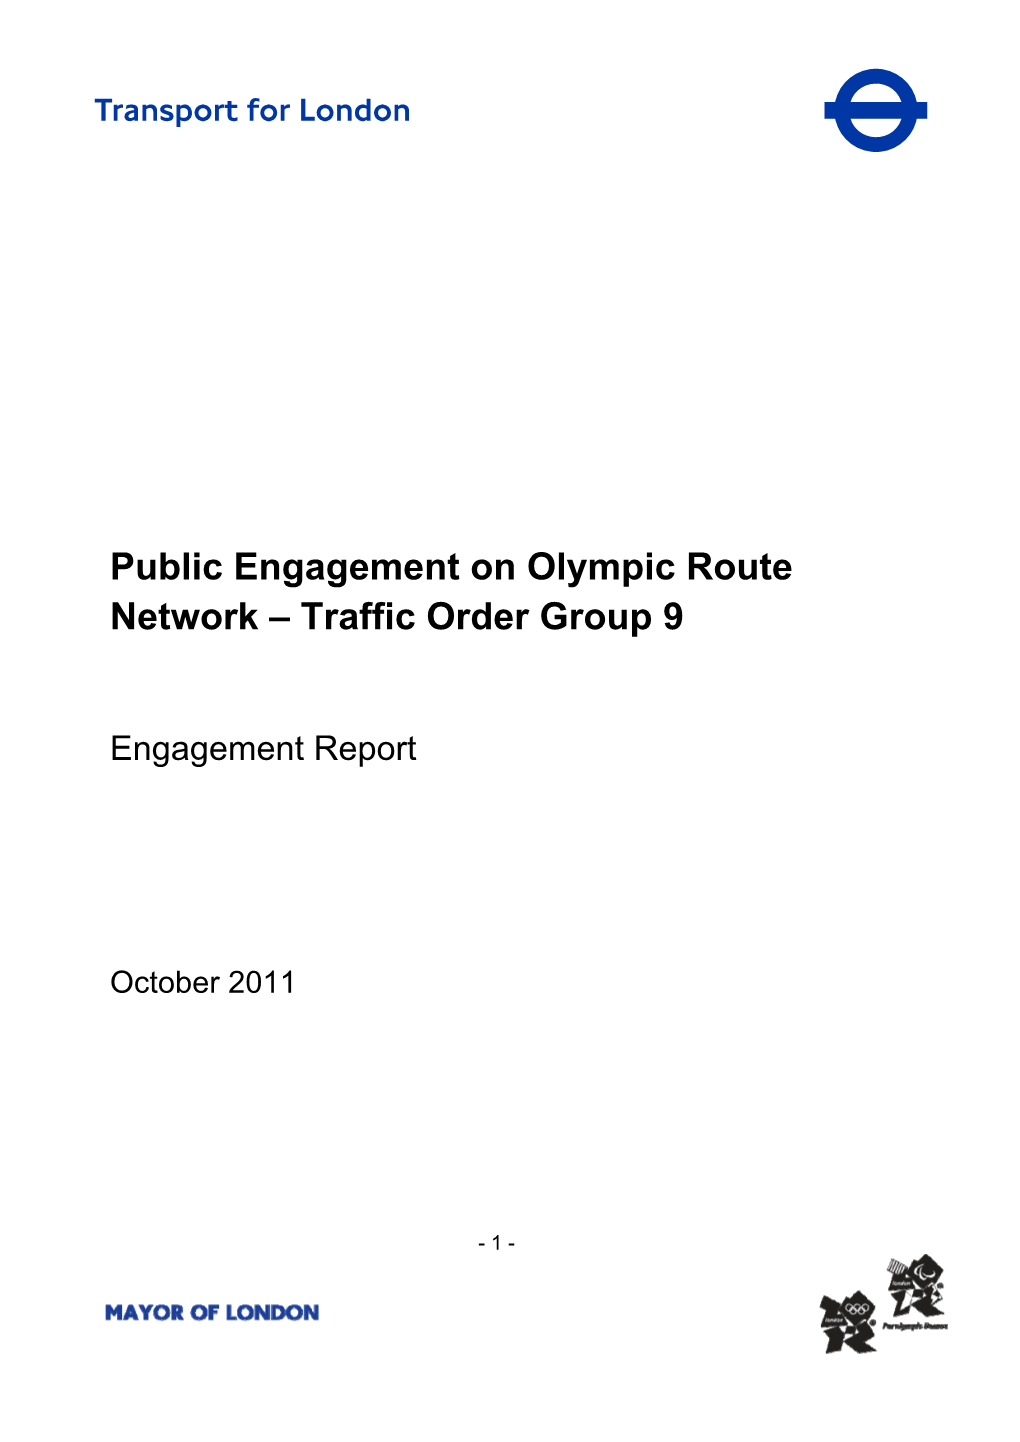 Public Engagement on Olympic Route Network – Traffic Order Group 9